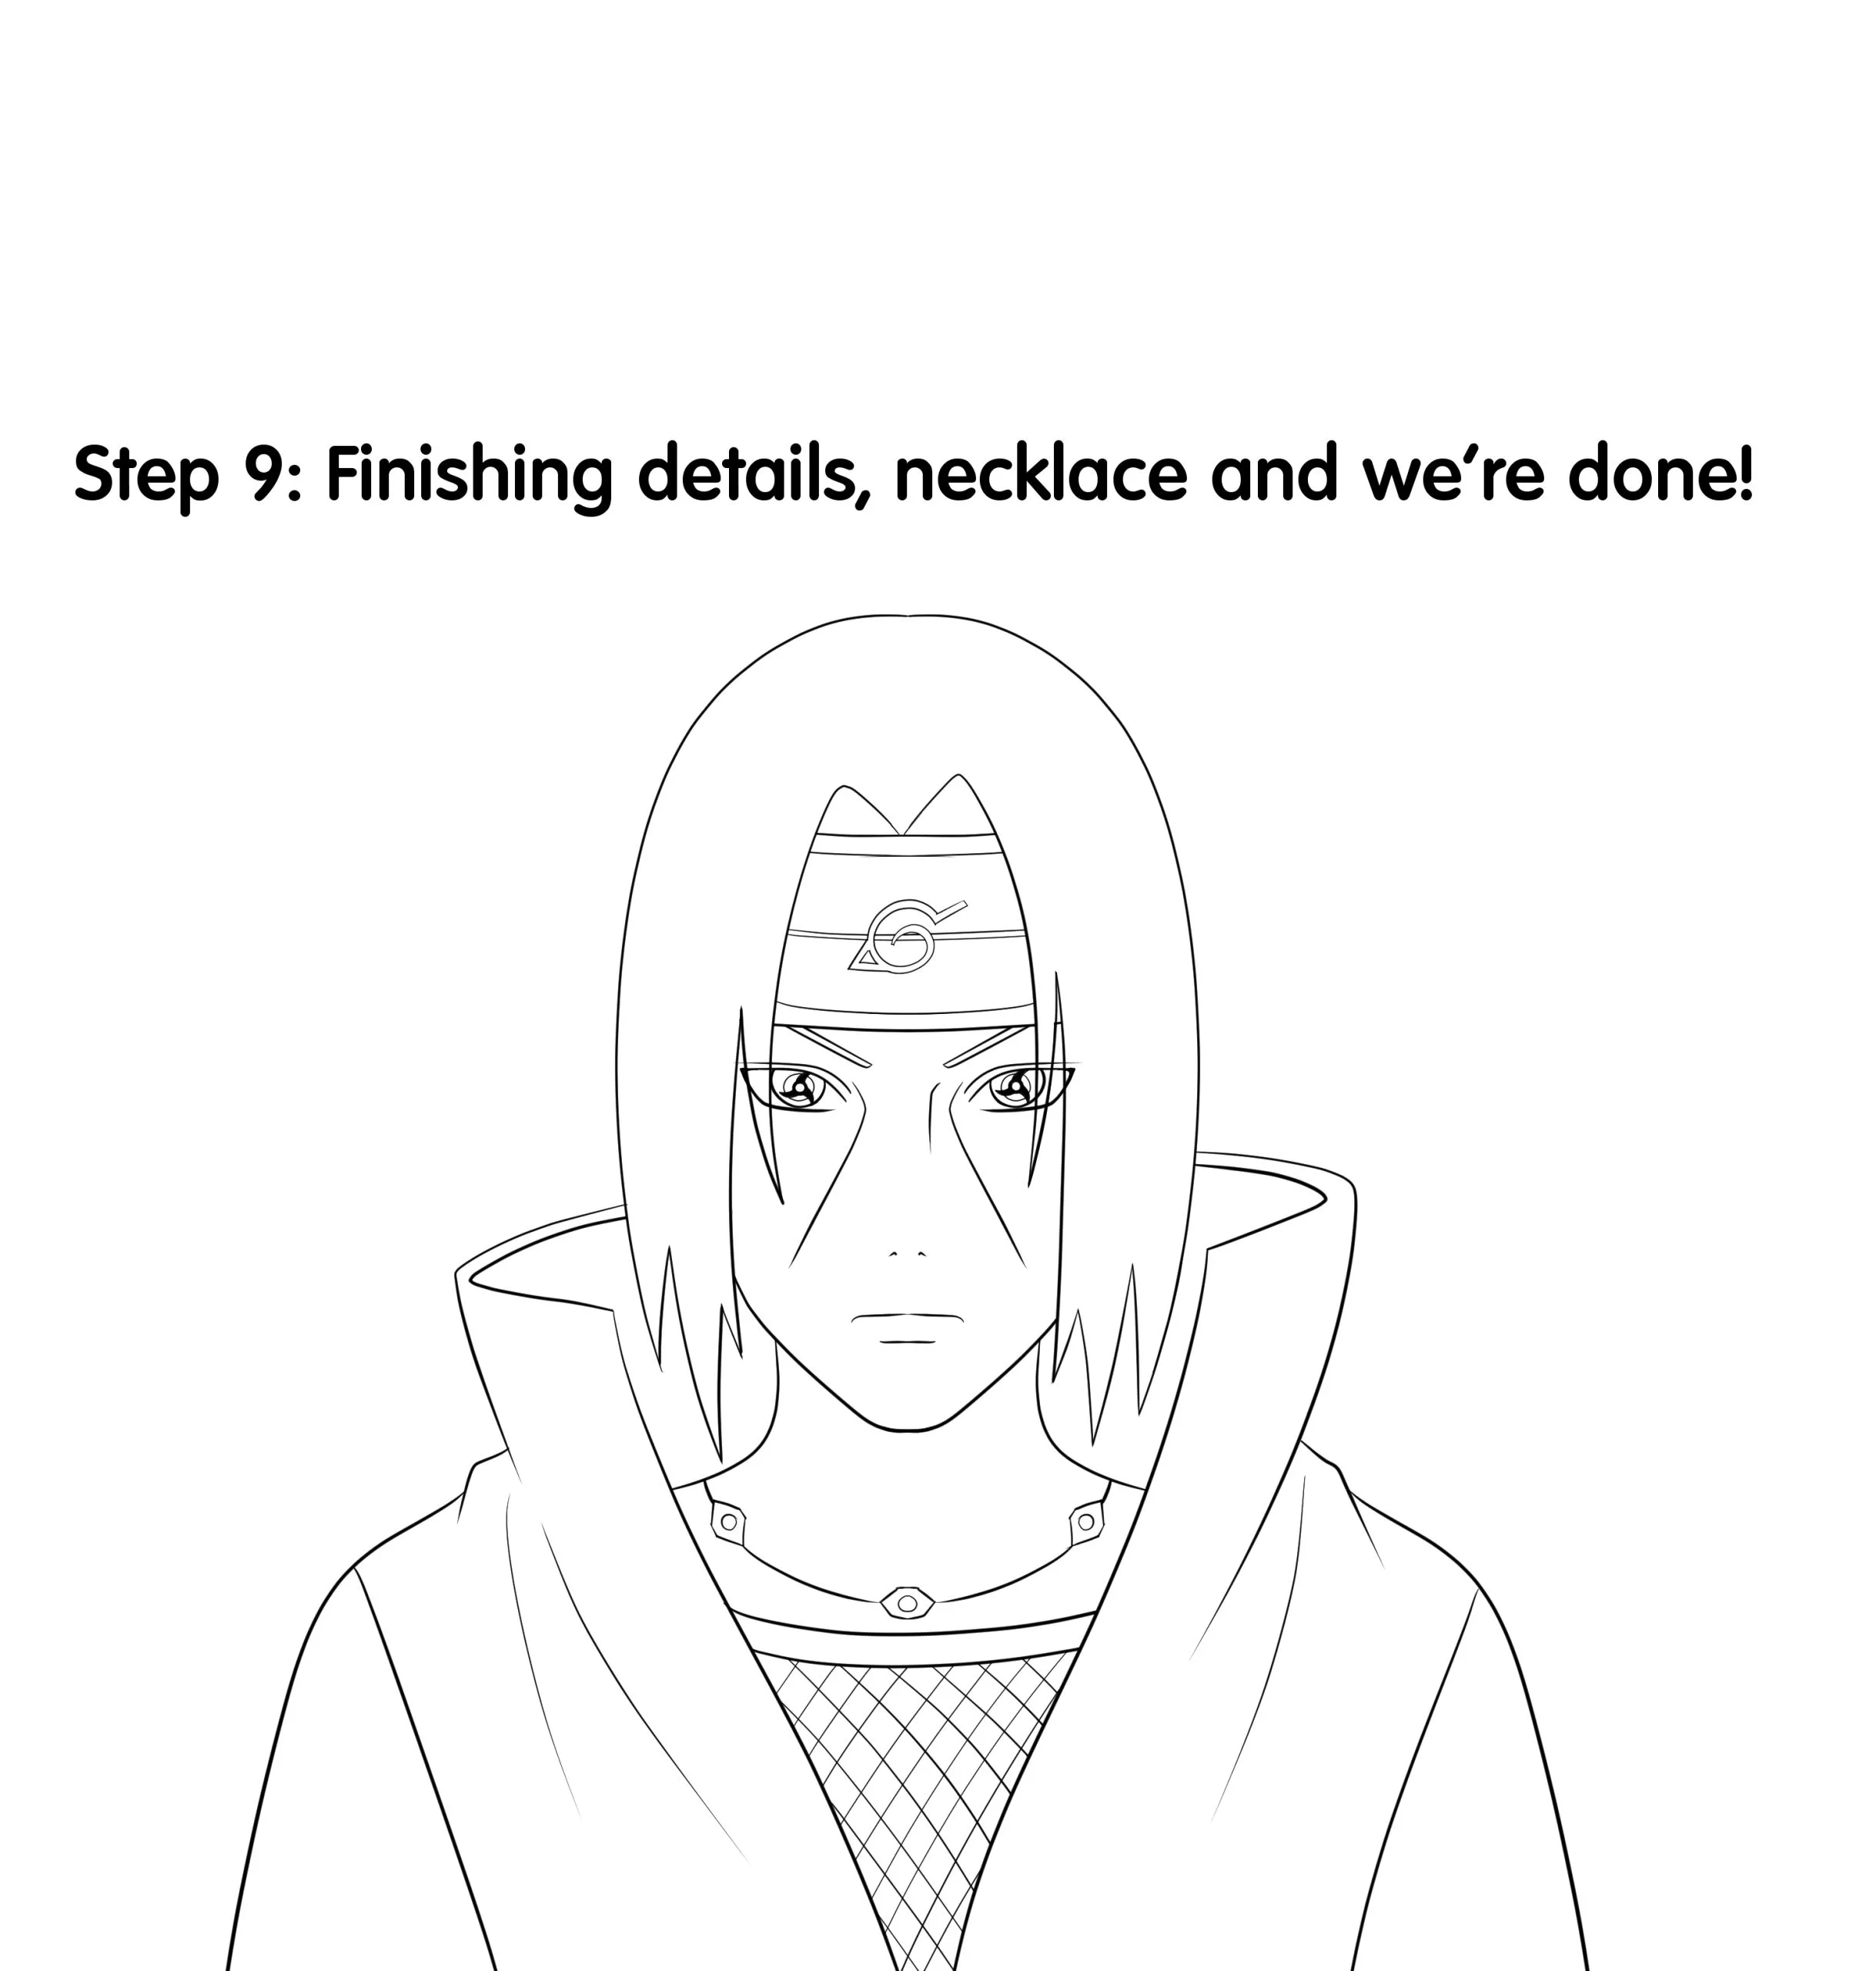 How to Draw Itachi Uchiha (Naruto)- Step by Step Lesson - video